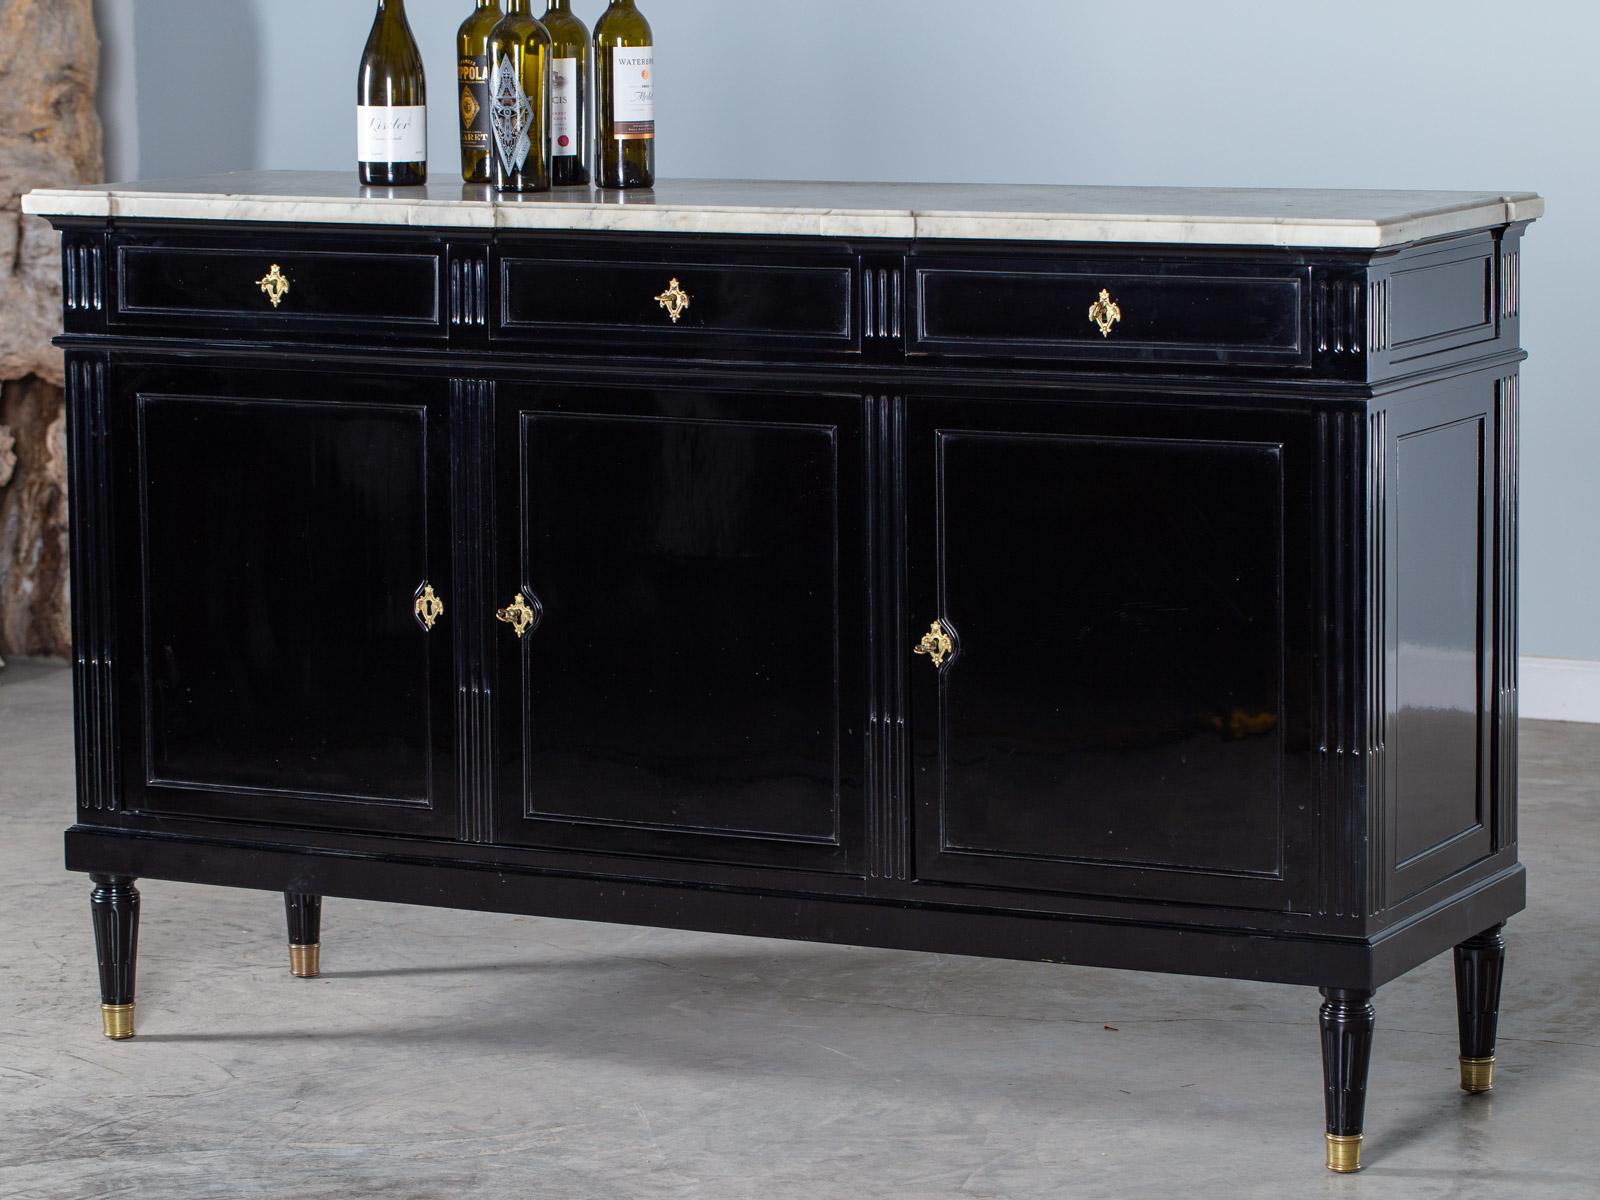 A stunning antique French Louis XVI style buffet credenza circa 1800 with its marble top and an ebonized black lacquer finish. The gilded handles and escutcheons gleam with a warm rich golden color and the brass caps on each foot have been polished